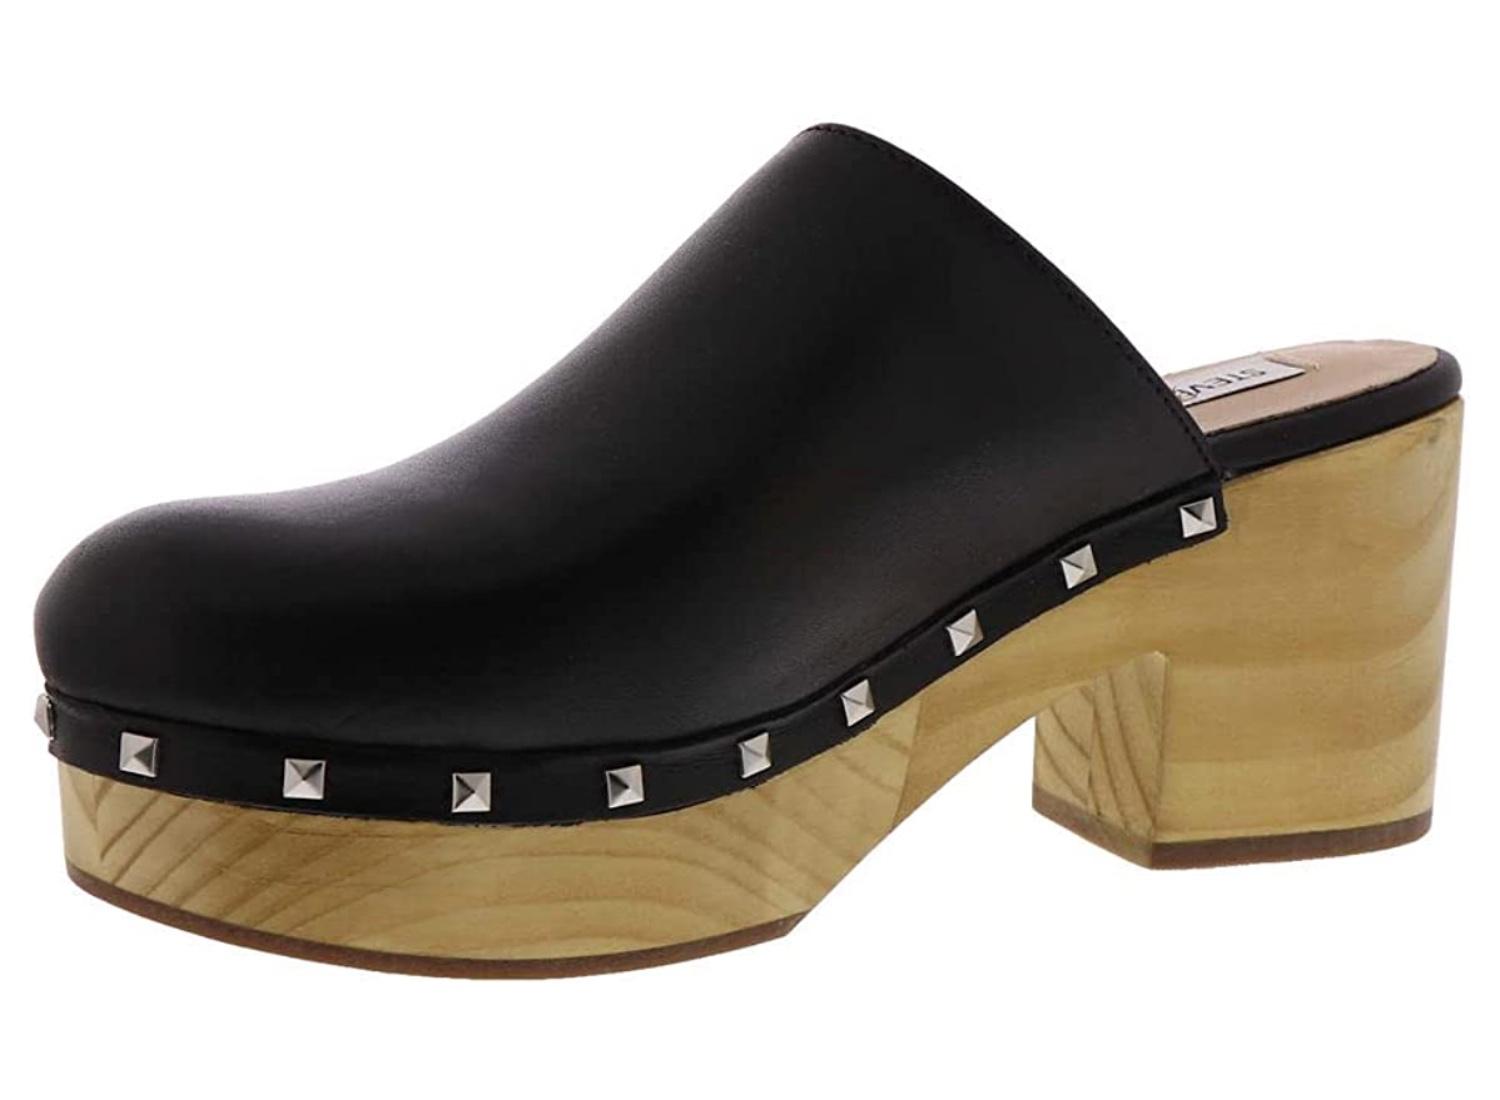 Black leather clog with small studs lining the base and a wood-like block heel